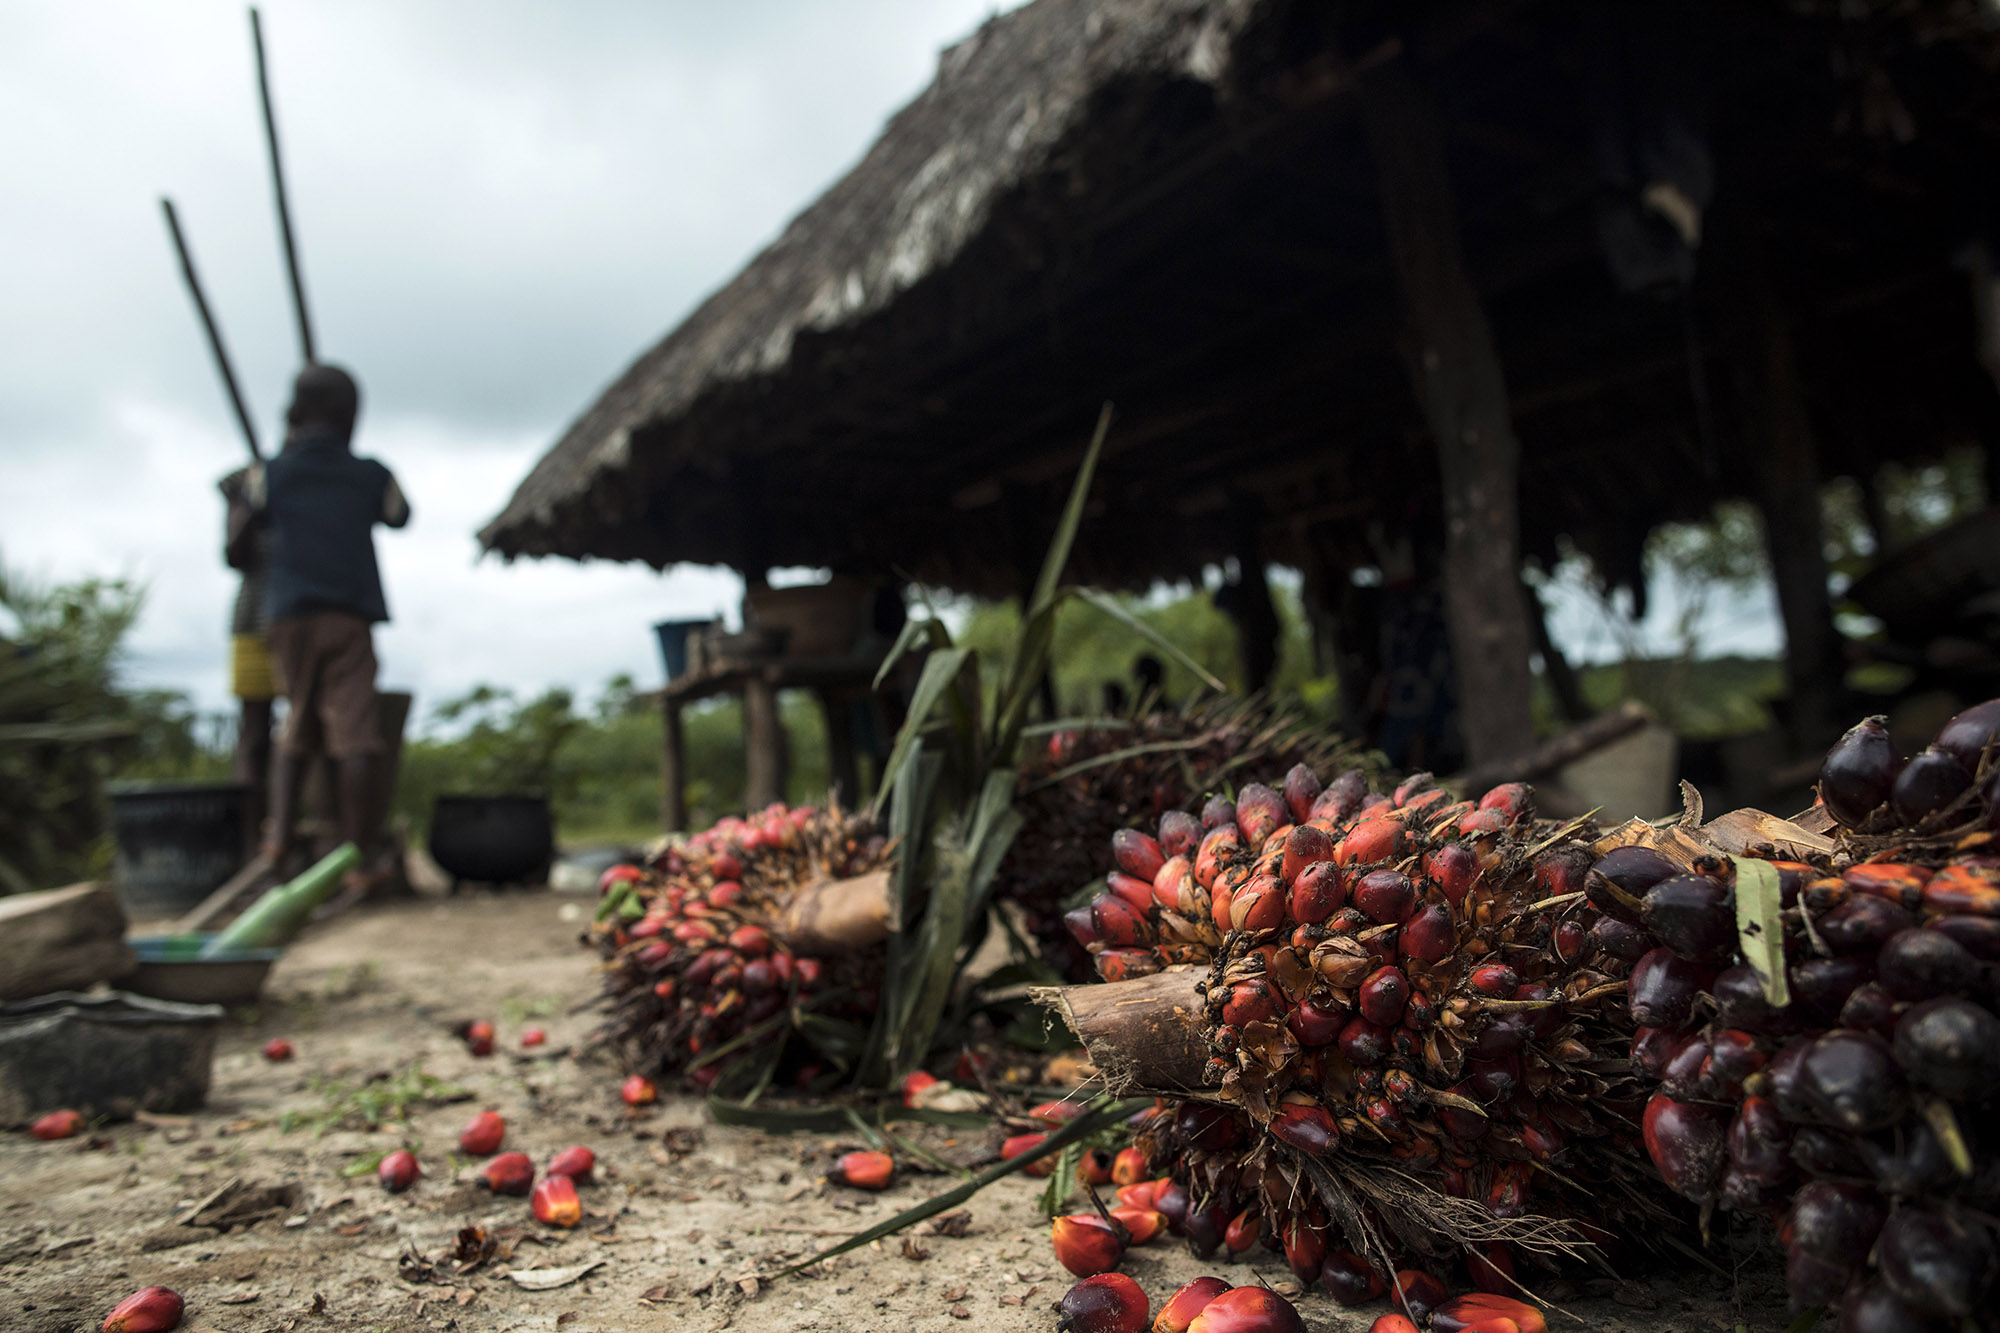  Fruits from palm trees lie in front of Garmondah Banwon's kitchen in Blayah Town. Banwon is an elder in the the Jogbahn Clan. The Jogbahn Clan fought against the British-owned company Equatorial Palm Oil (EPO) when they tried to take over their land